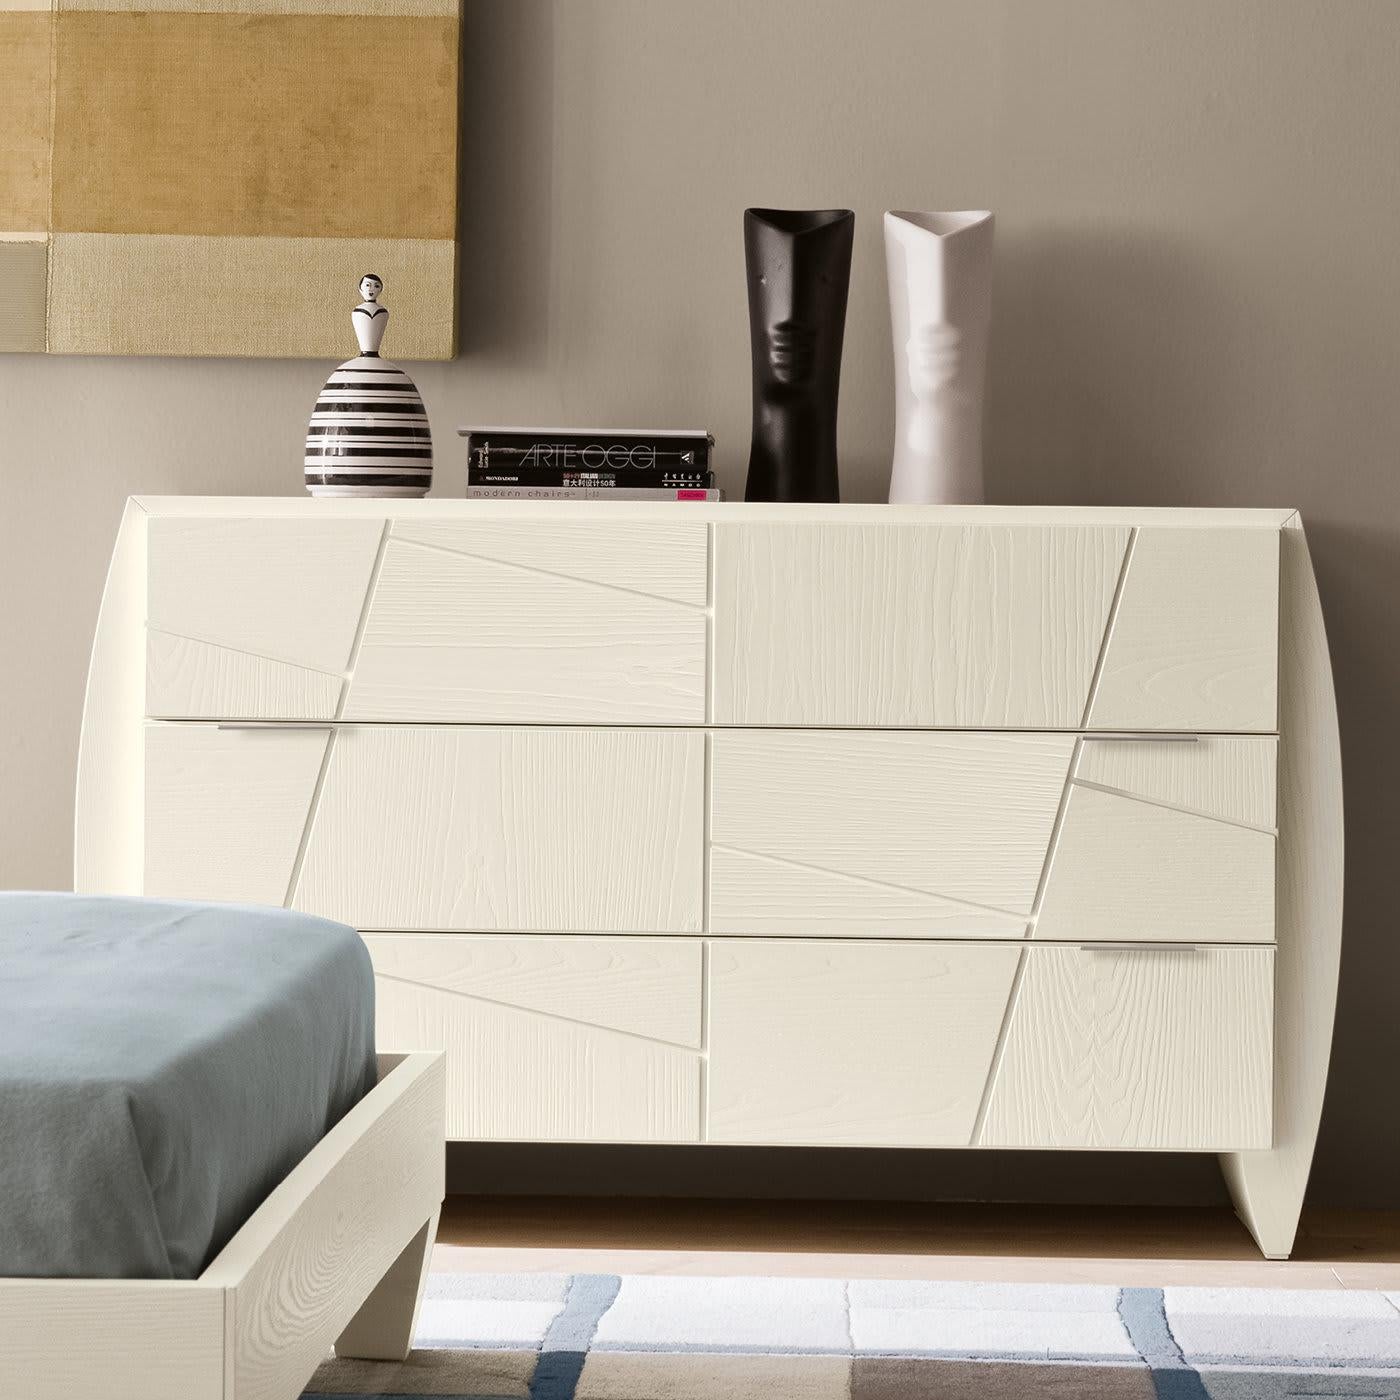 Designed to pair with the Mondrian Bed, the Mondrian Dresser features a clean geometric design in homage to the artist. Crafted in walnut wood, the dresser is coated in Modo10's Noce Natura finish (natural walnut), but can also be personalized with